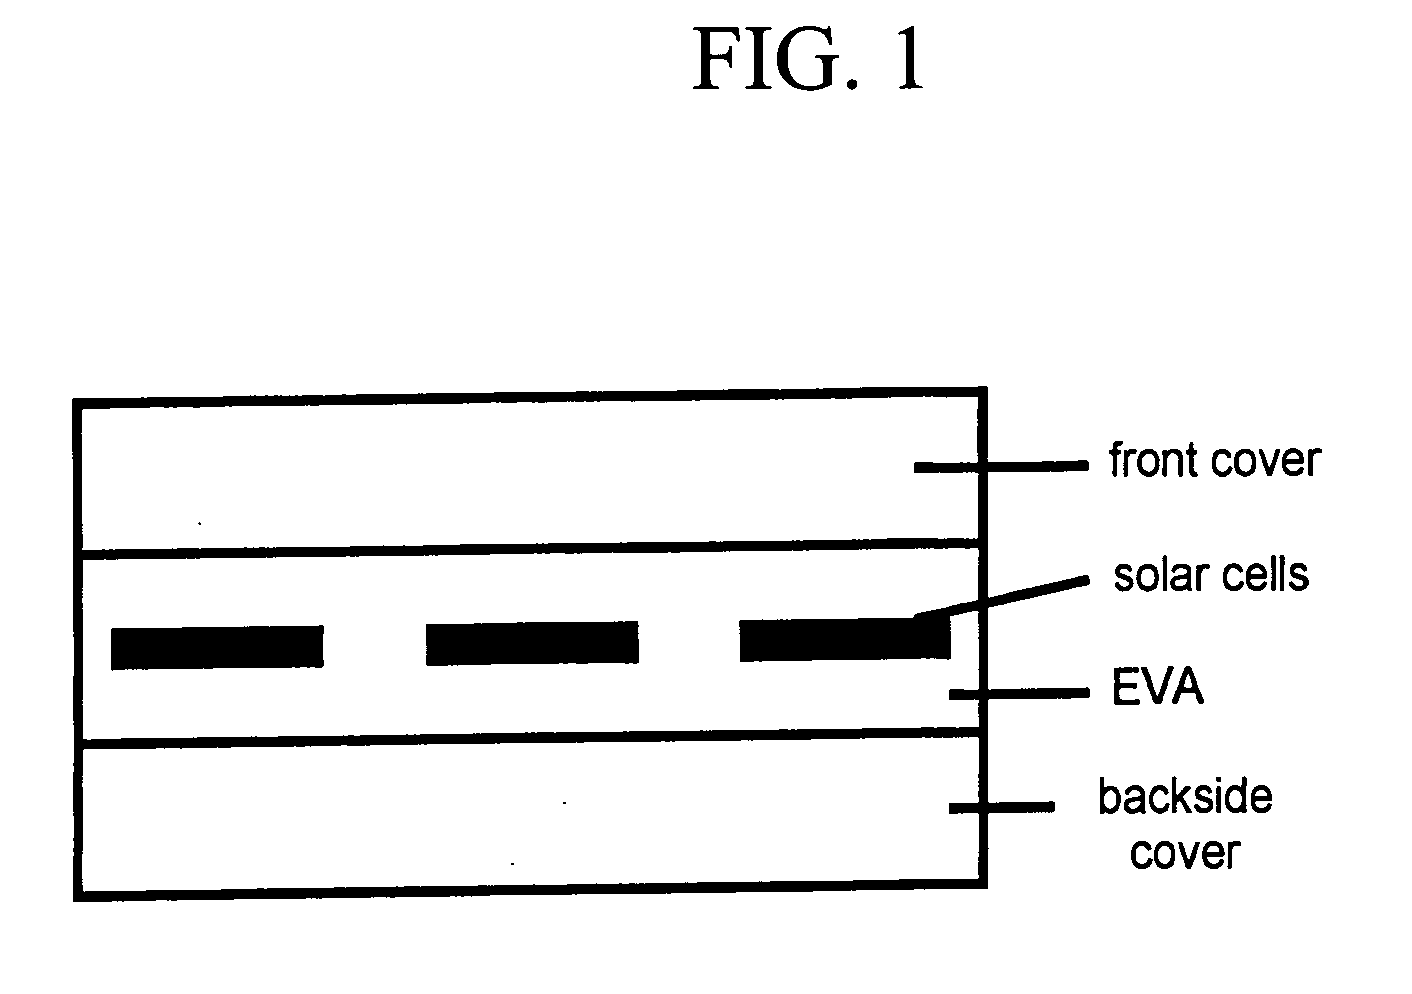 White coated polyester film, process for production thereof and use thereof as a backside cover in solar modules